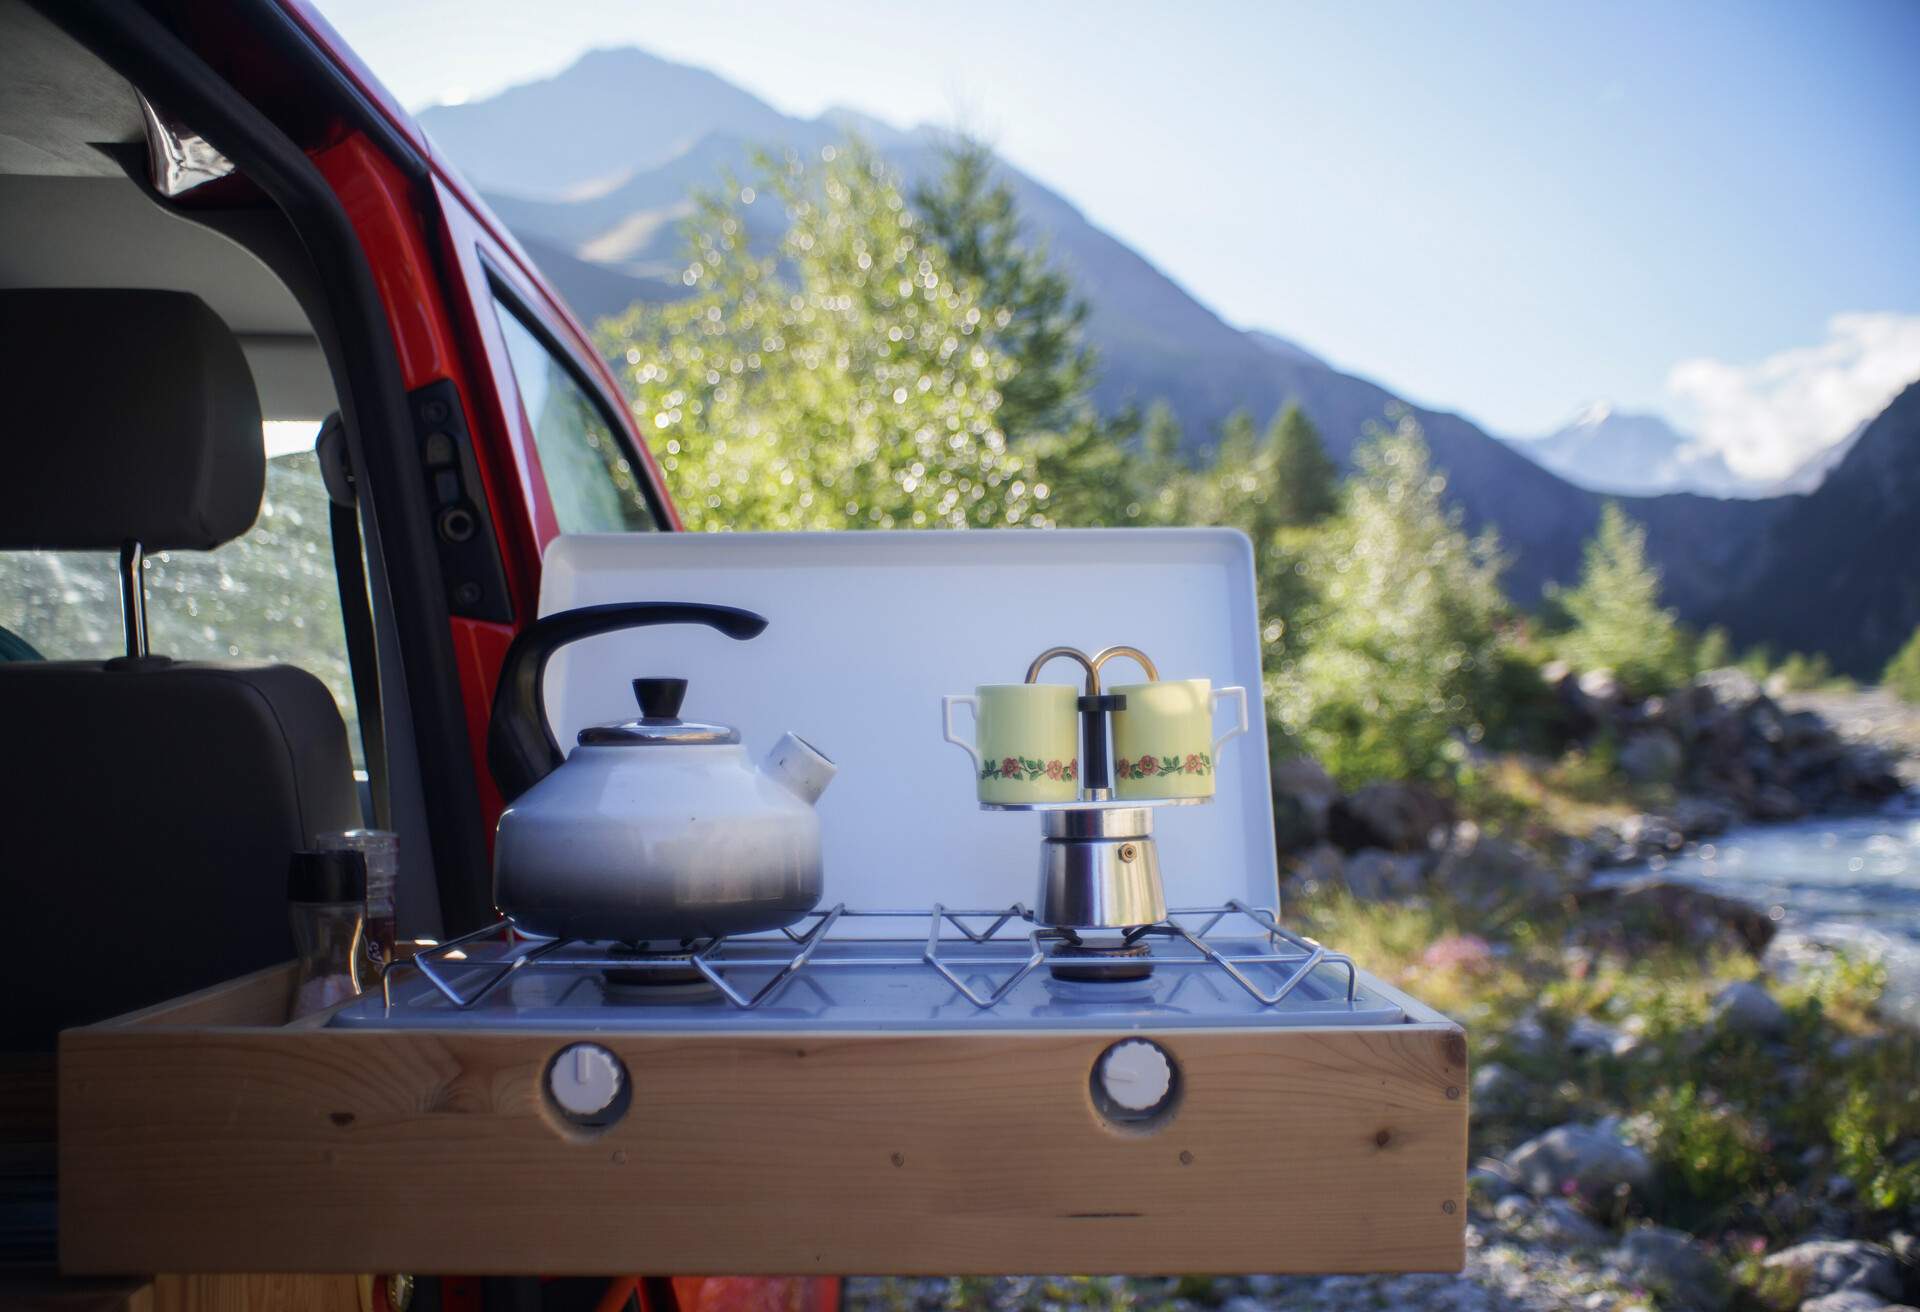 Van life at it's best: Making coffee in the middle of nowhere with the amazing view of the French Alps. A nice feature of this campervan: you can slide the gas stove outside!